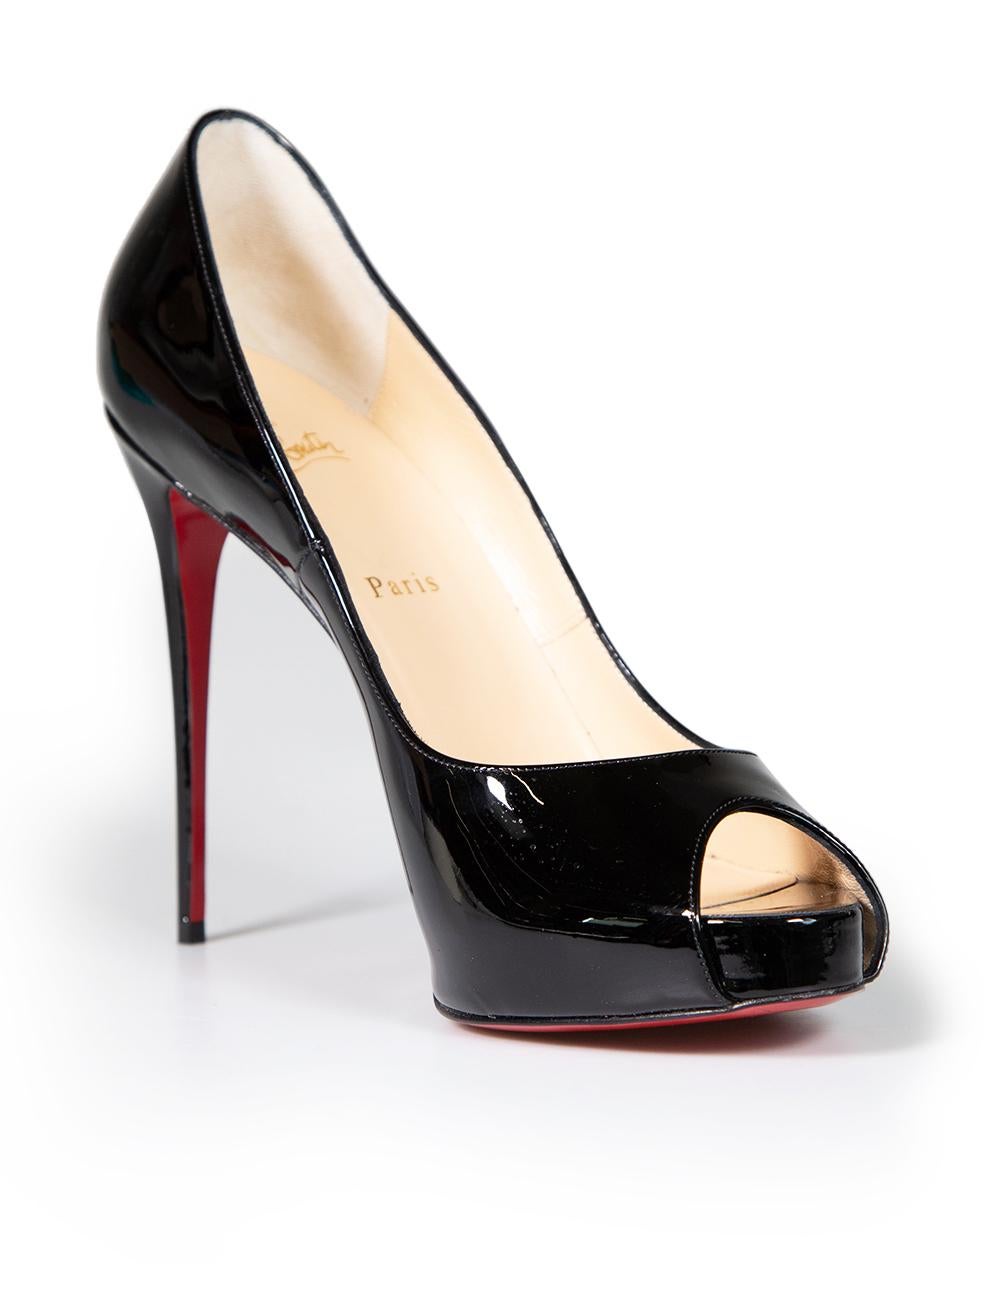 CONDITION is Very good. Minimal wear to heels is evident. Minimal wear to soles of both shoes on this used Christian Louboutin designer resale item. This item comes with original dust bag and shoebox.
 
 
 
 Details
 
 
 Model: Very Privé 120
 
